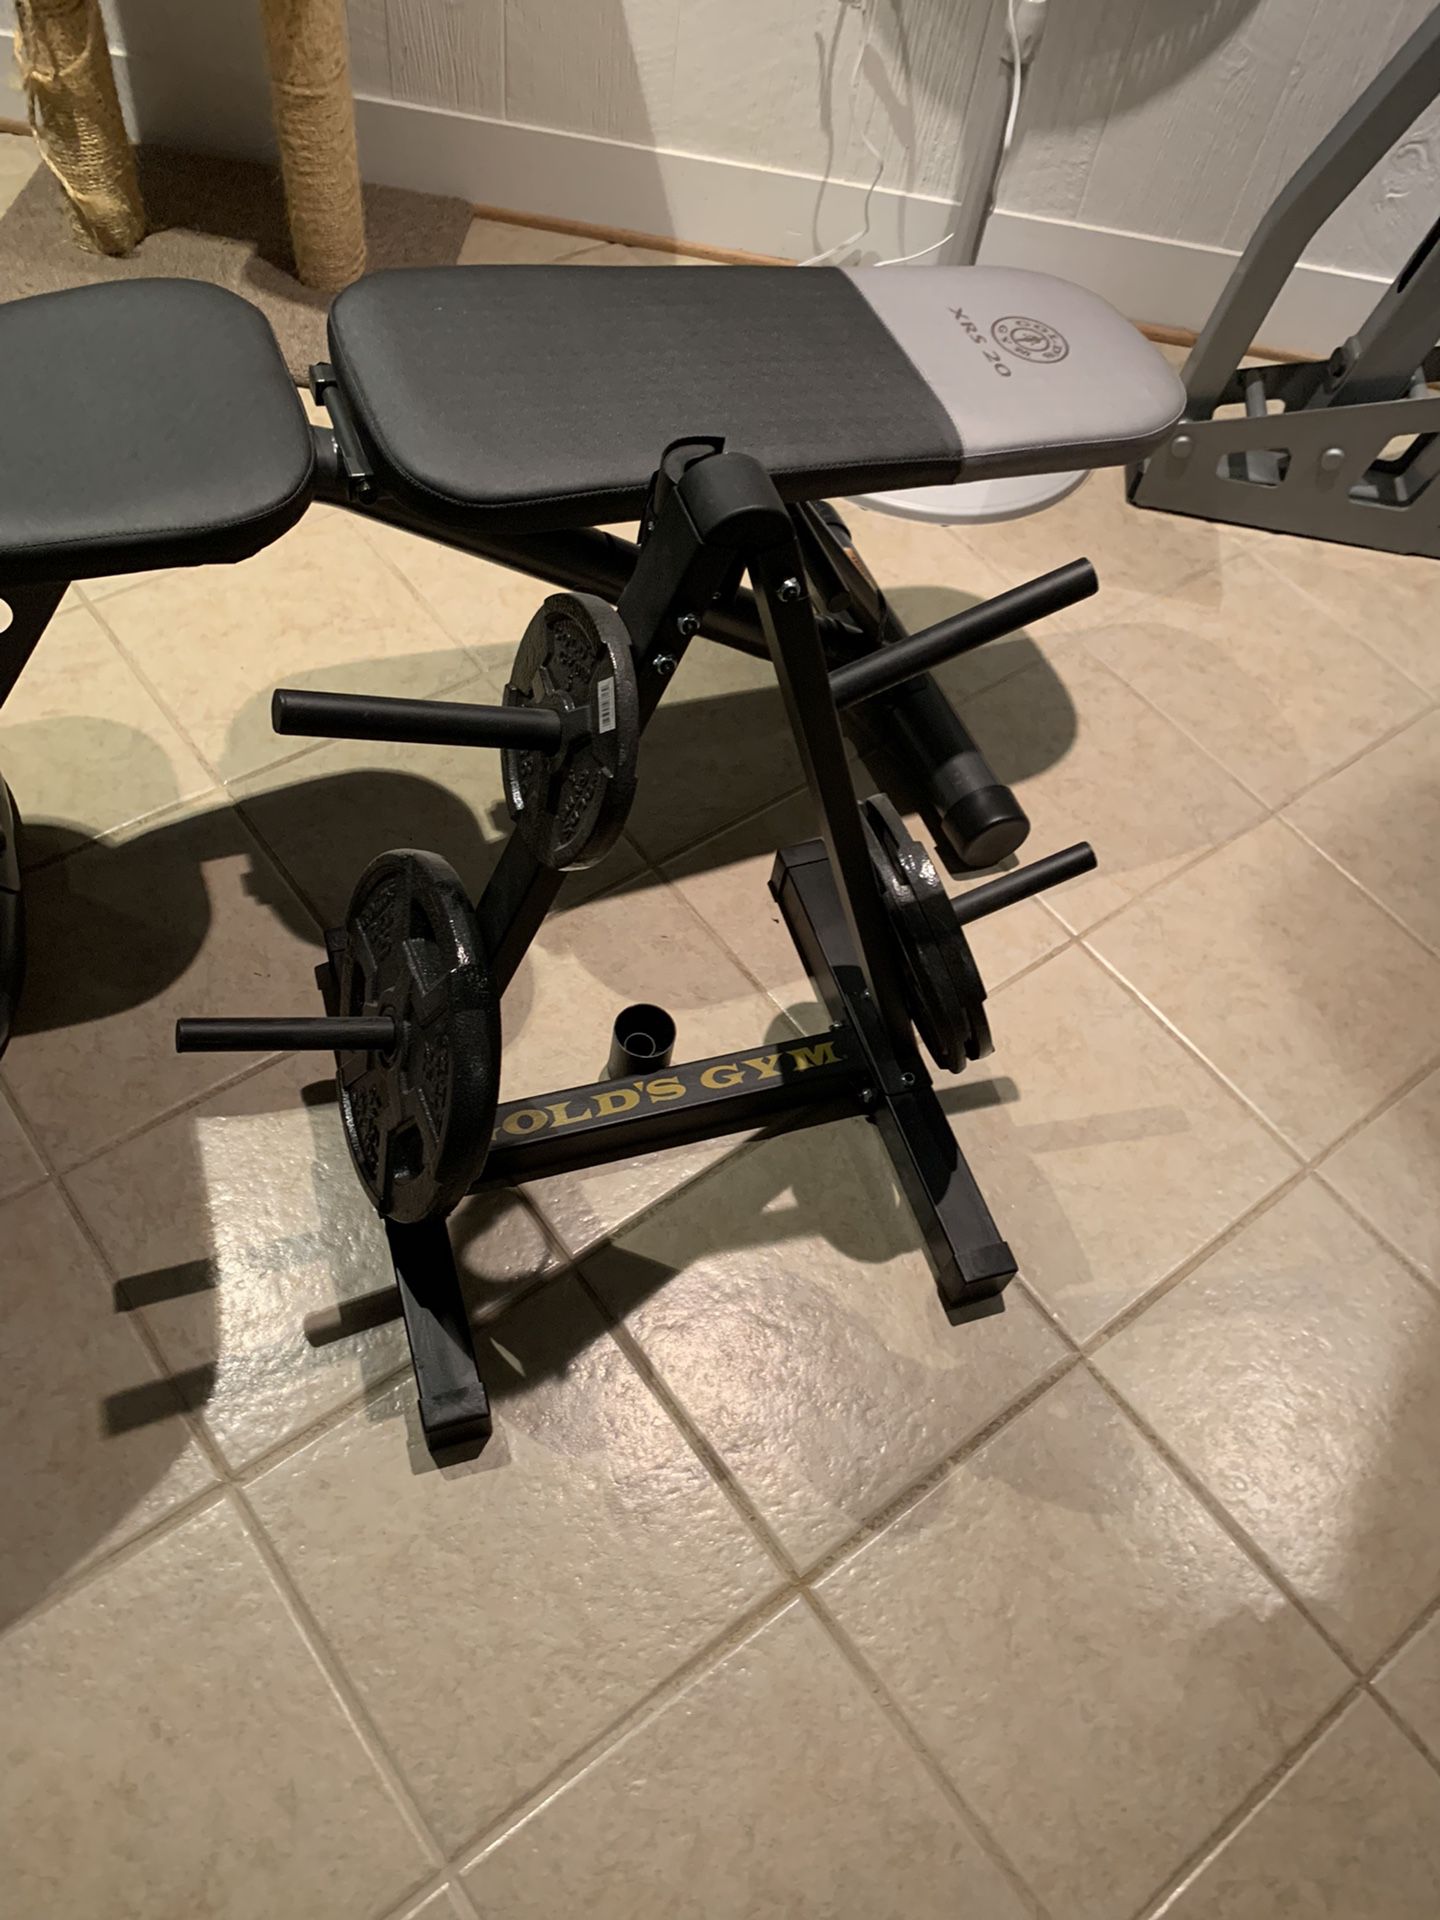 Weight Bench Storage Rack And Plates Like New Golds Gym Brand 